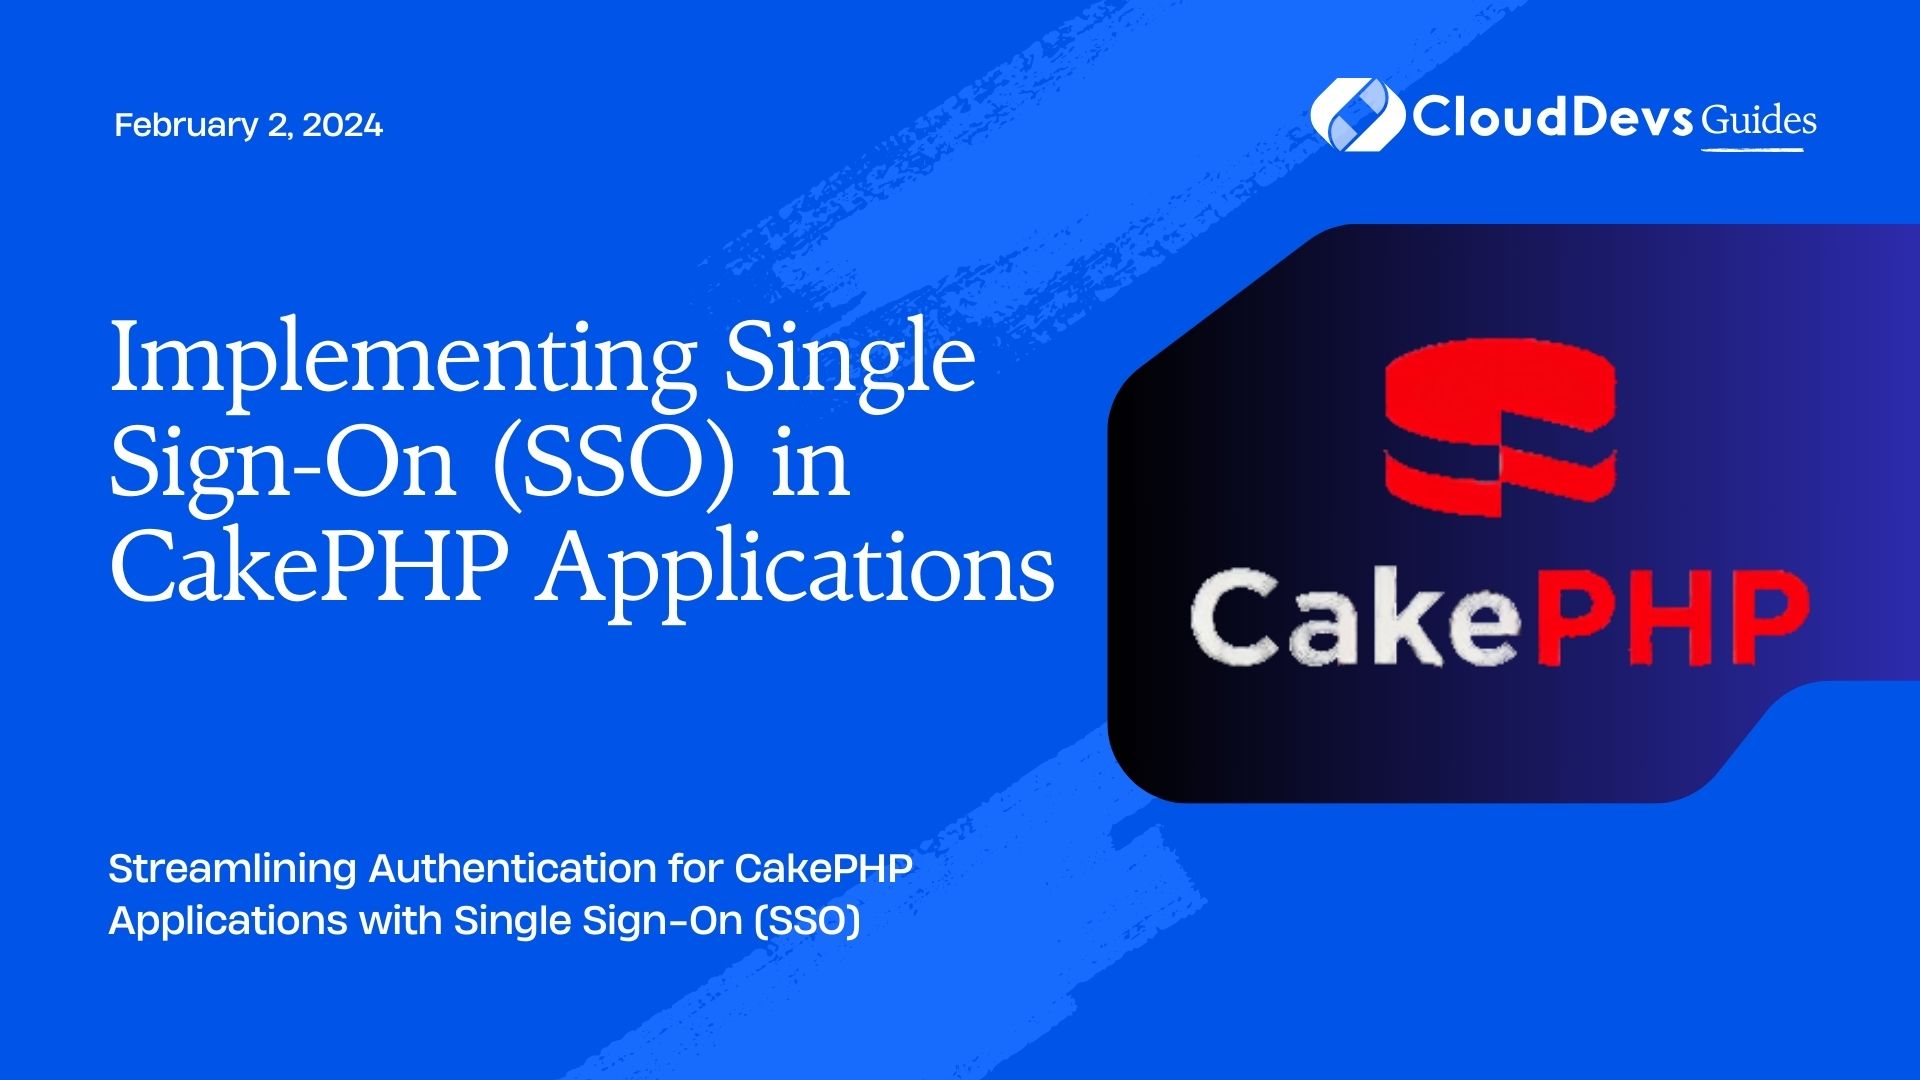 Implementing Single Sign-On (SSO) in CakePHP Applications